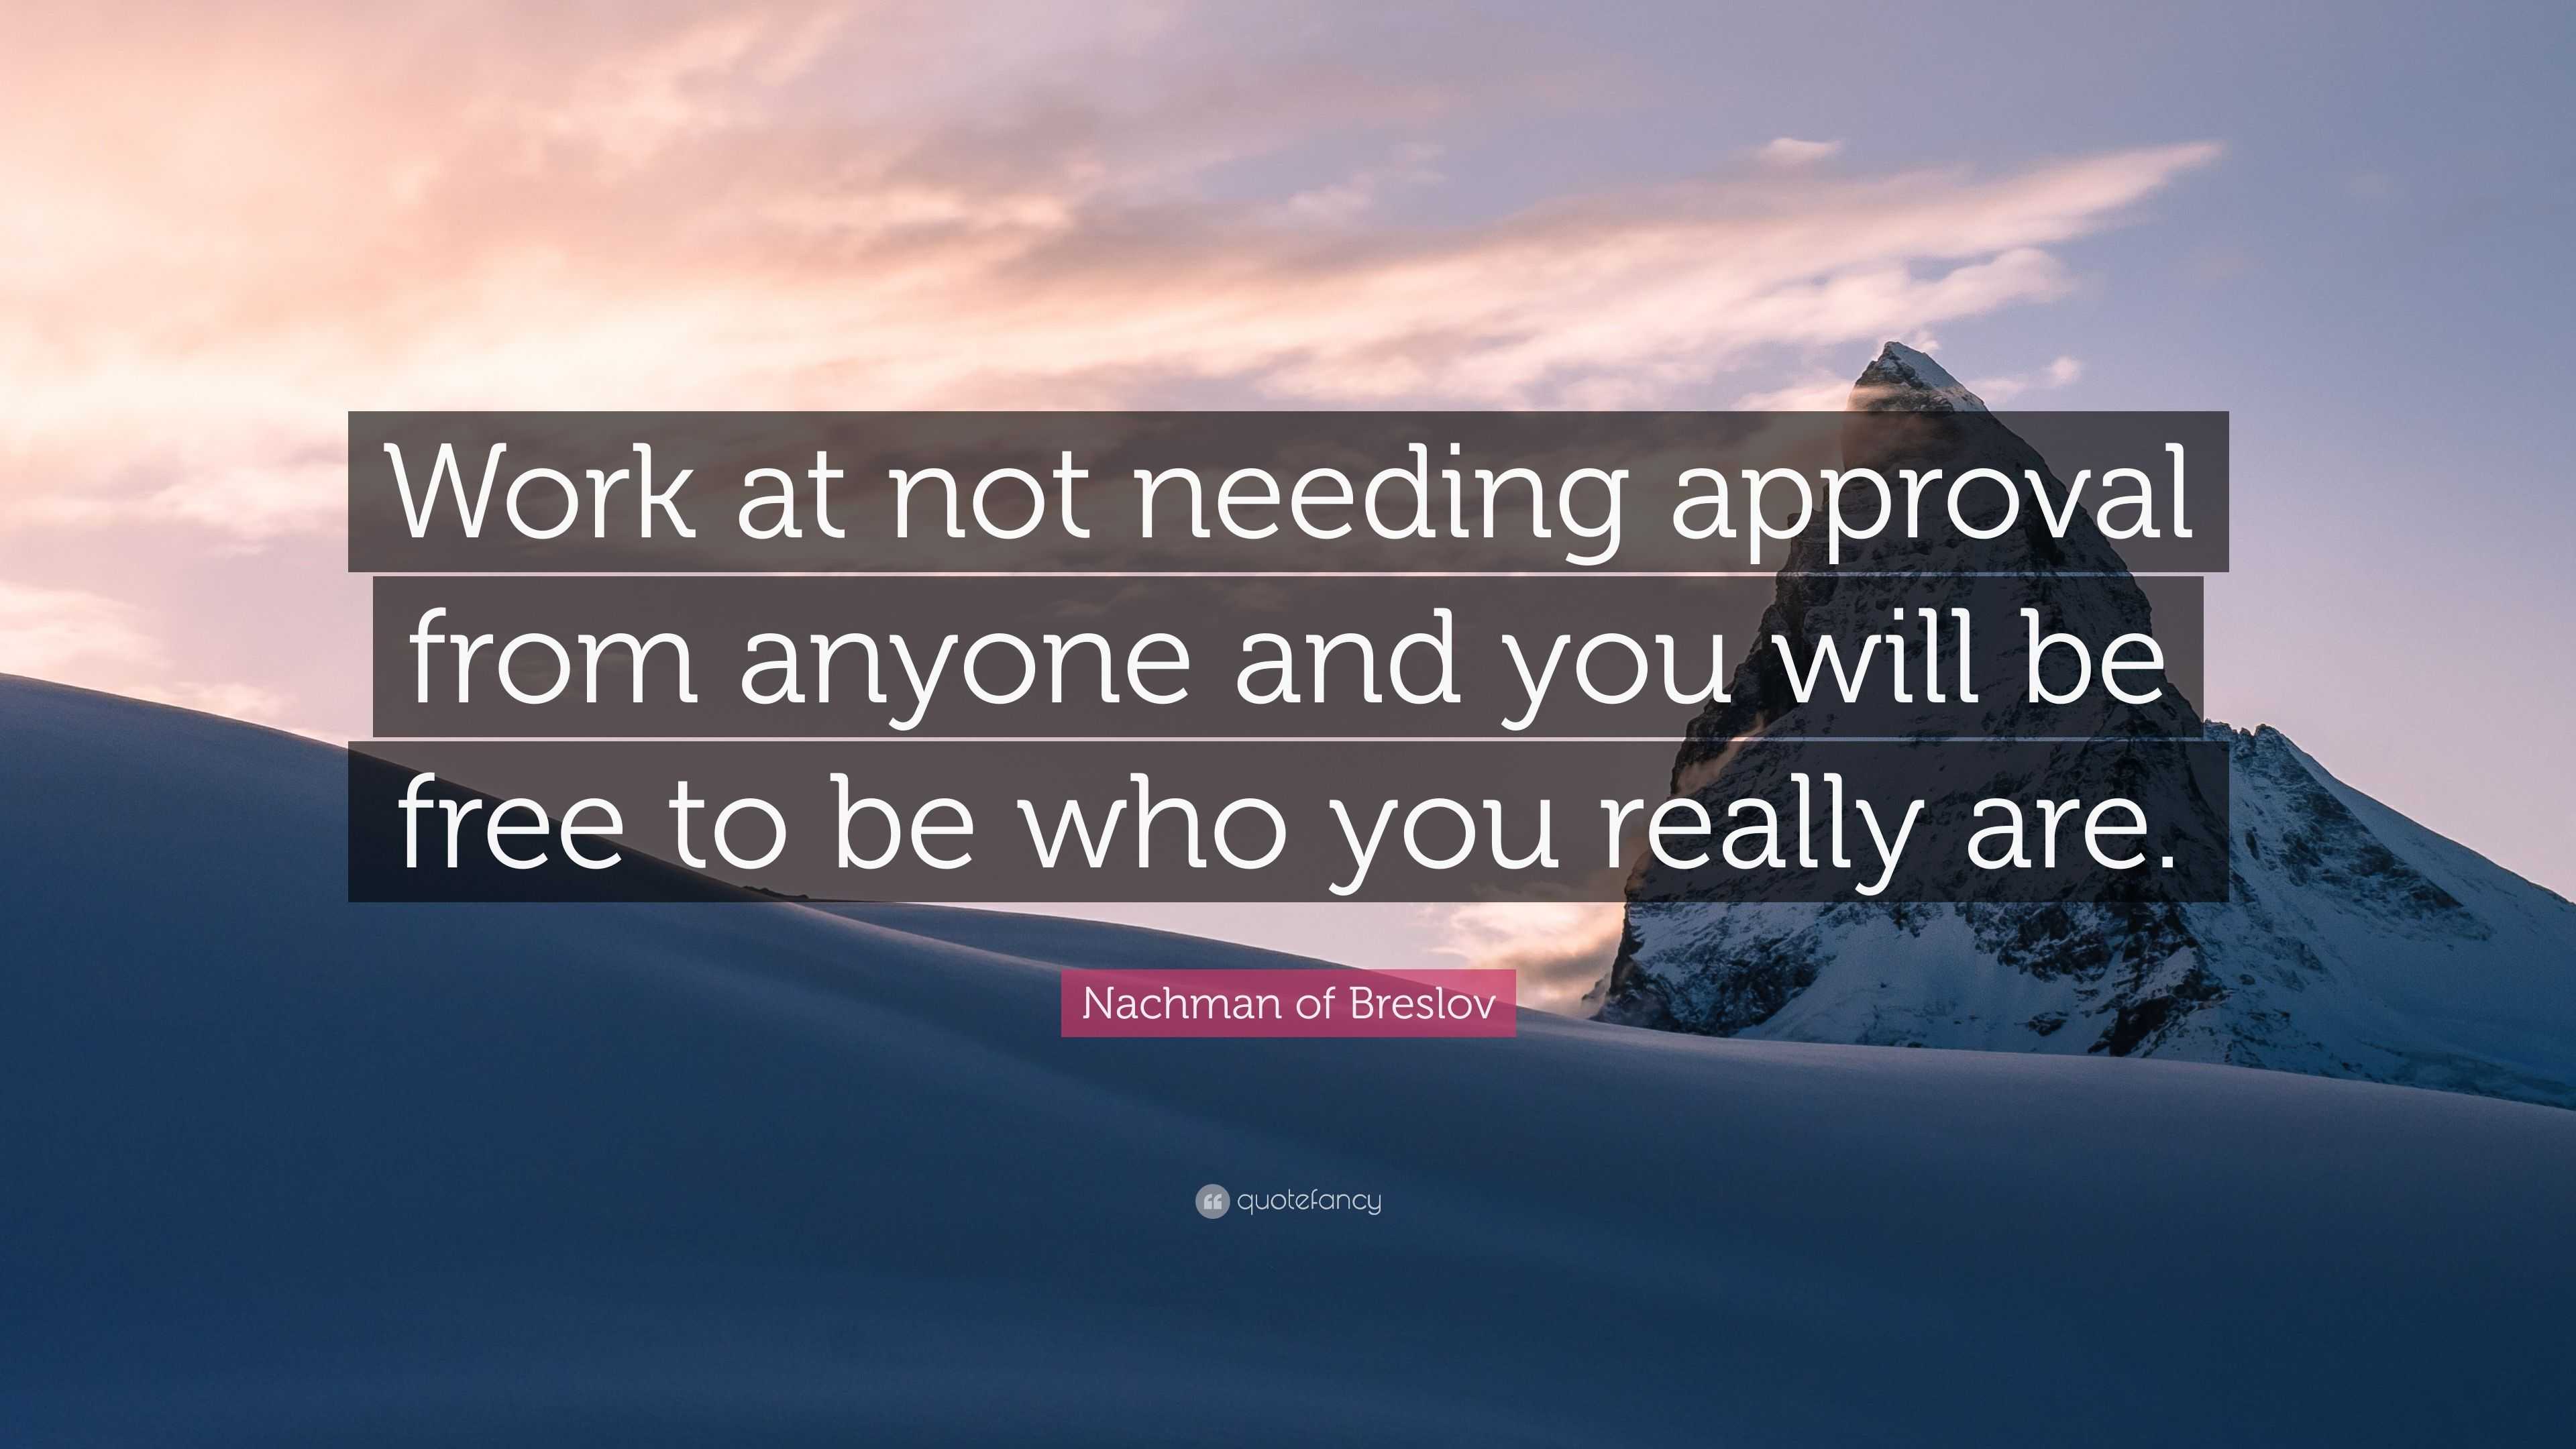 Nachman of Breslov Quote: “Work at not needing approval from anyone and